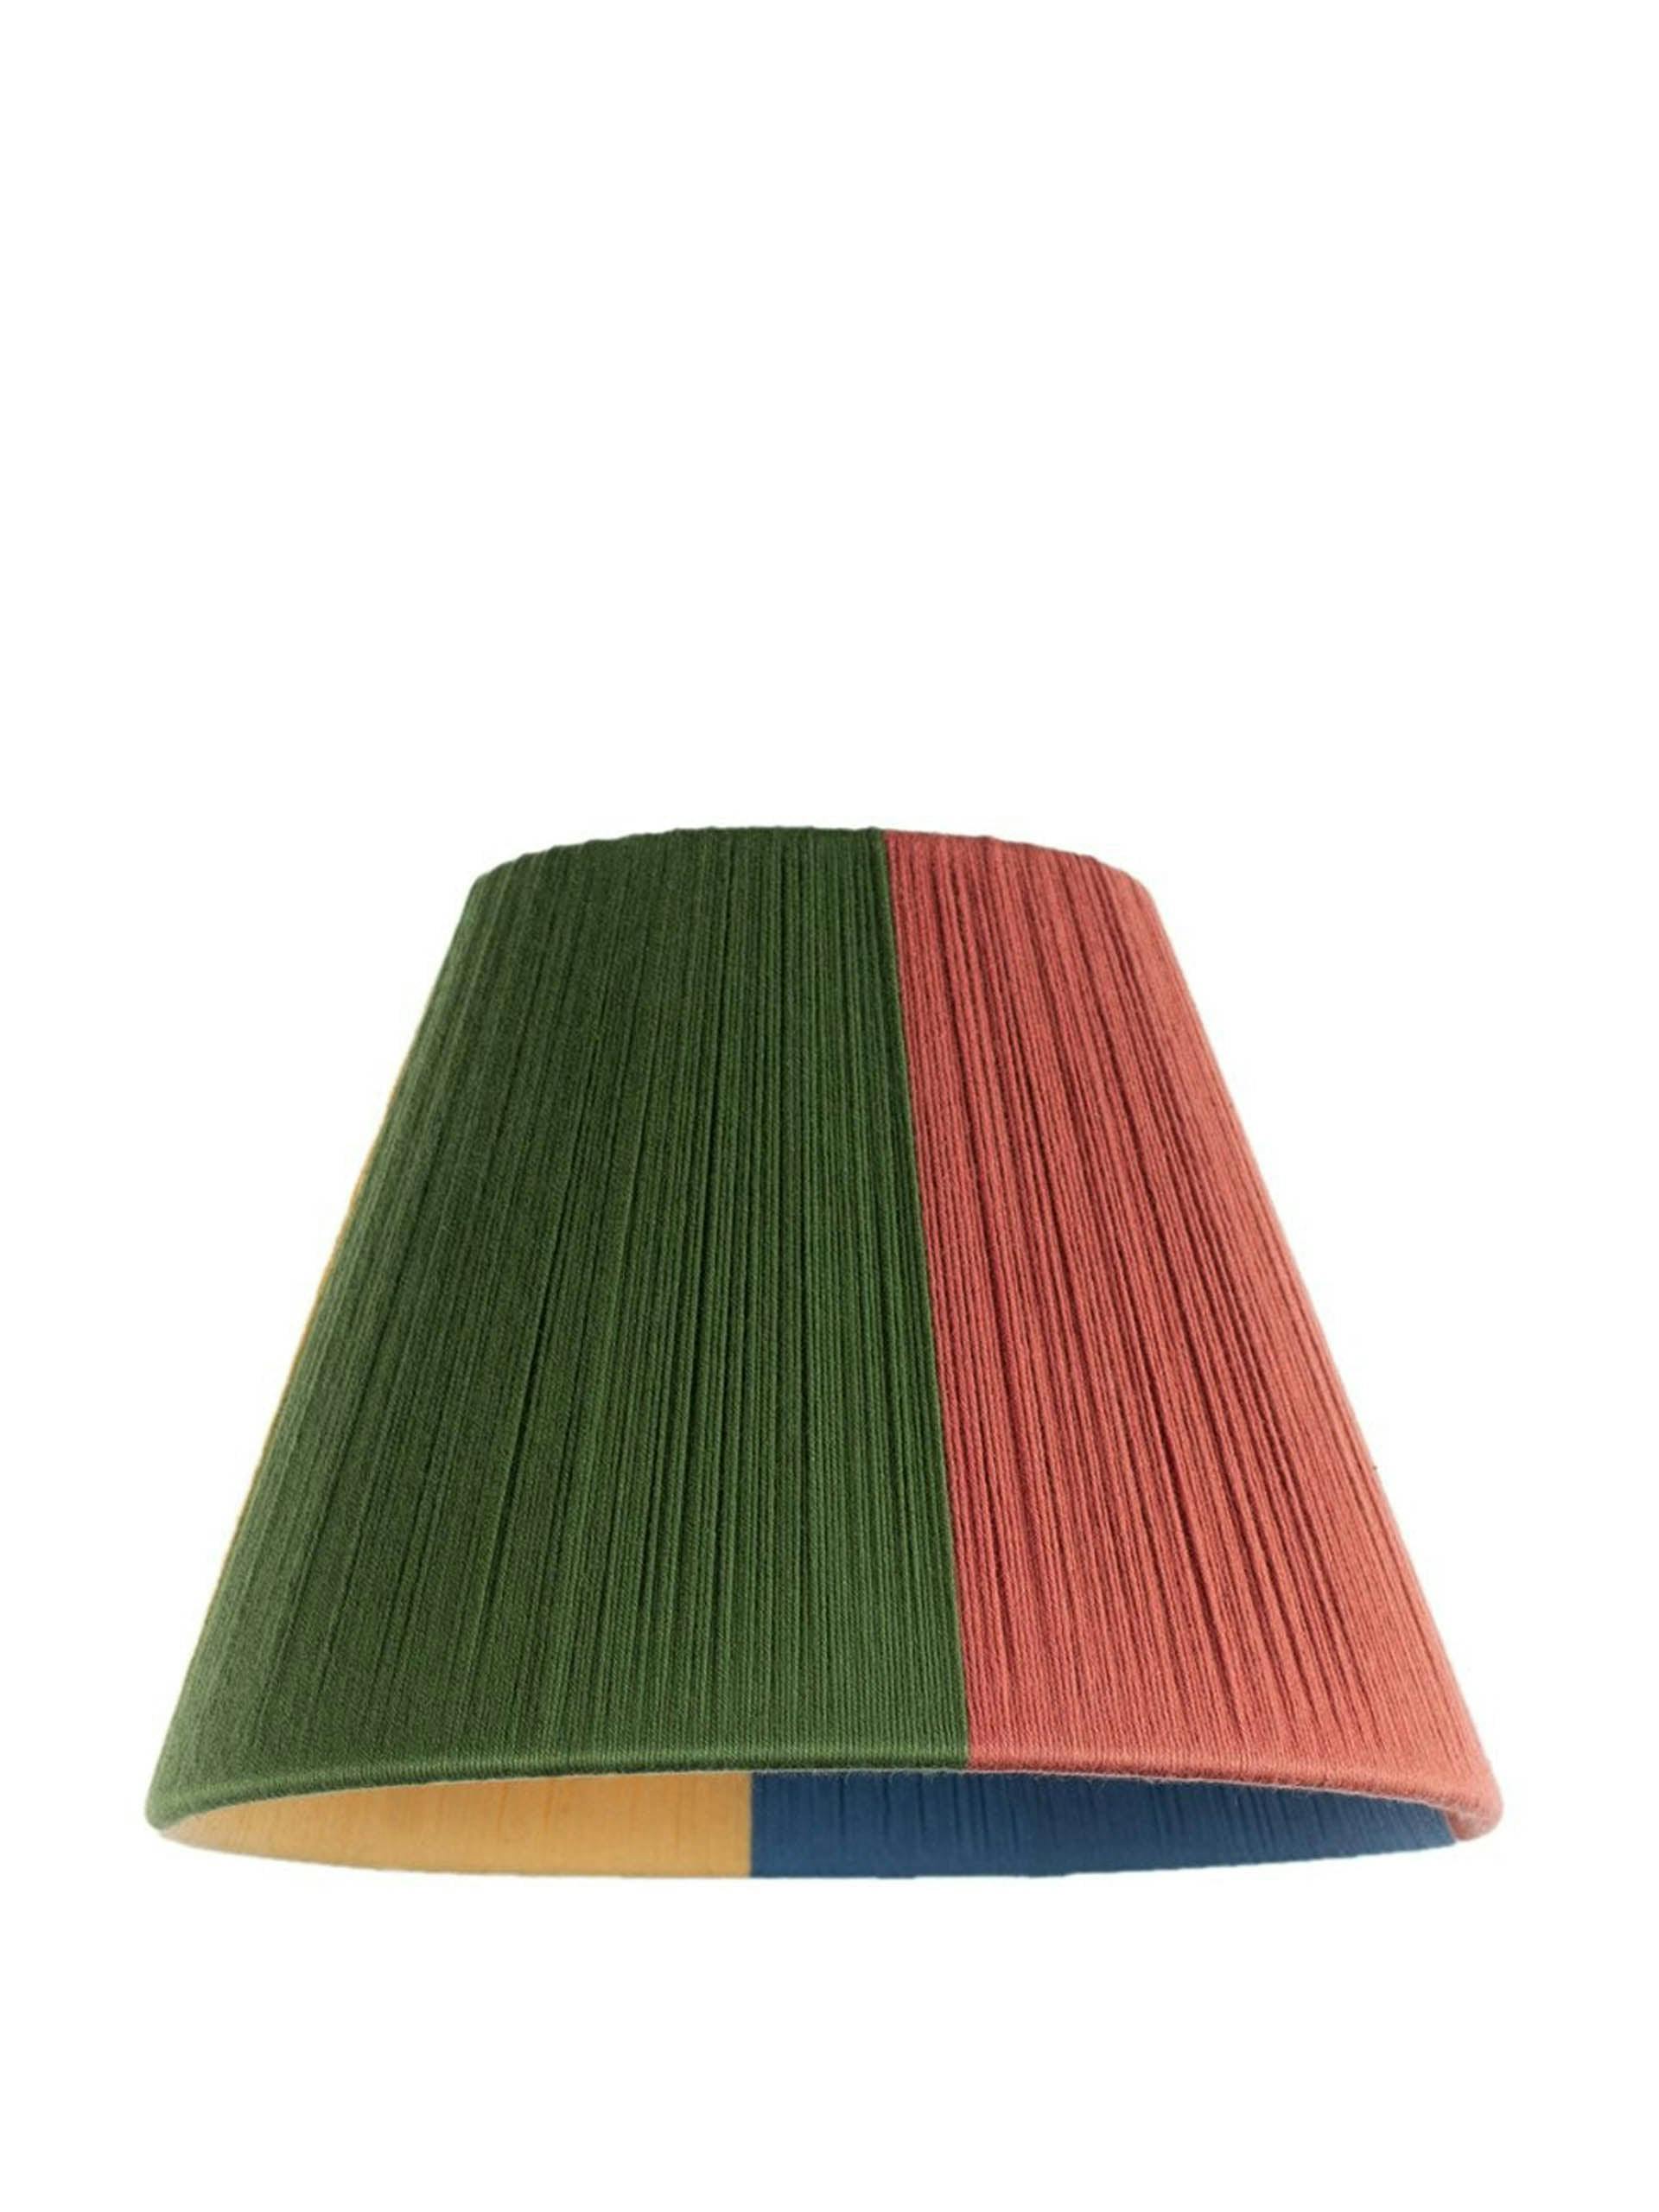 Humble Pie lampshade